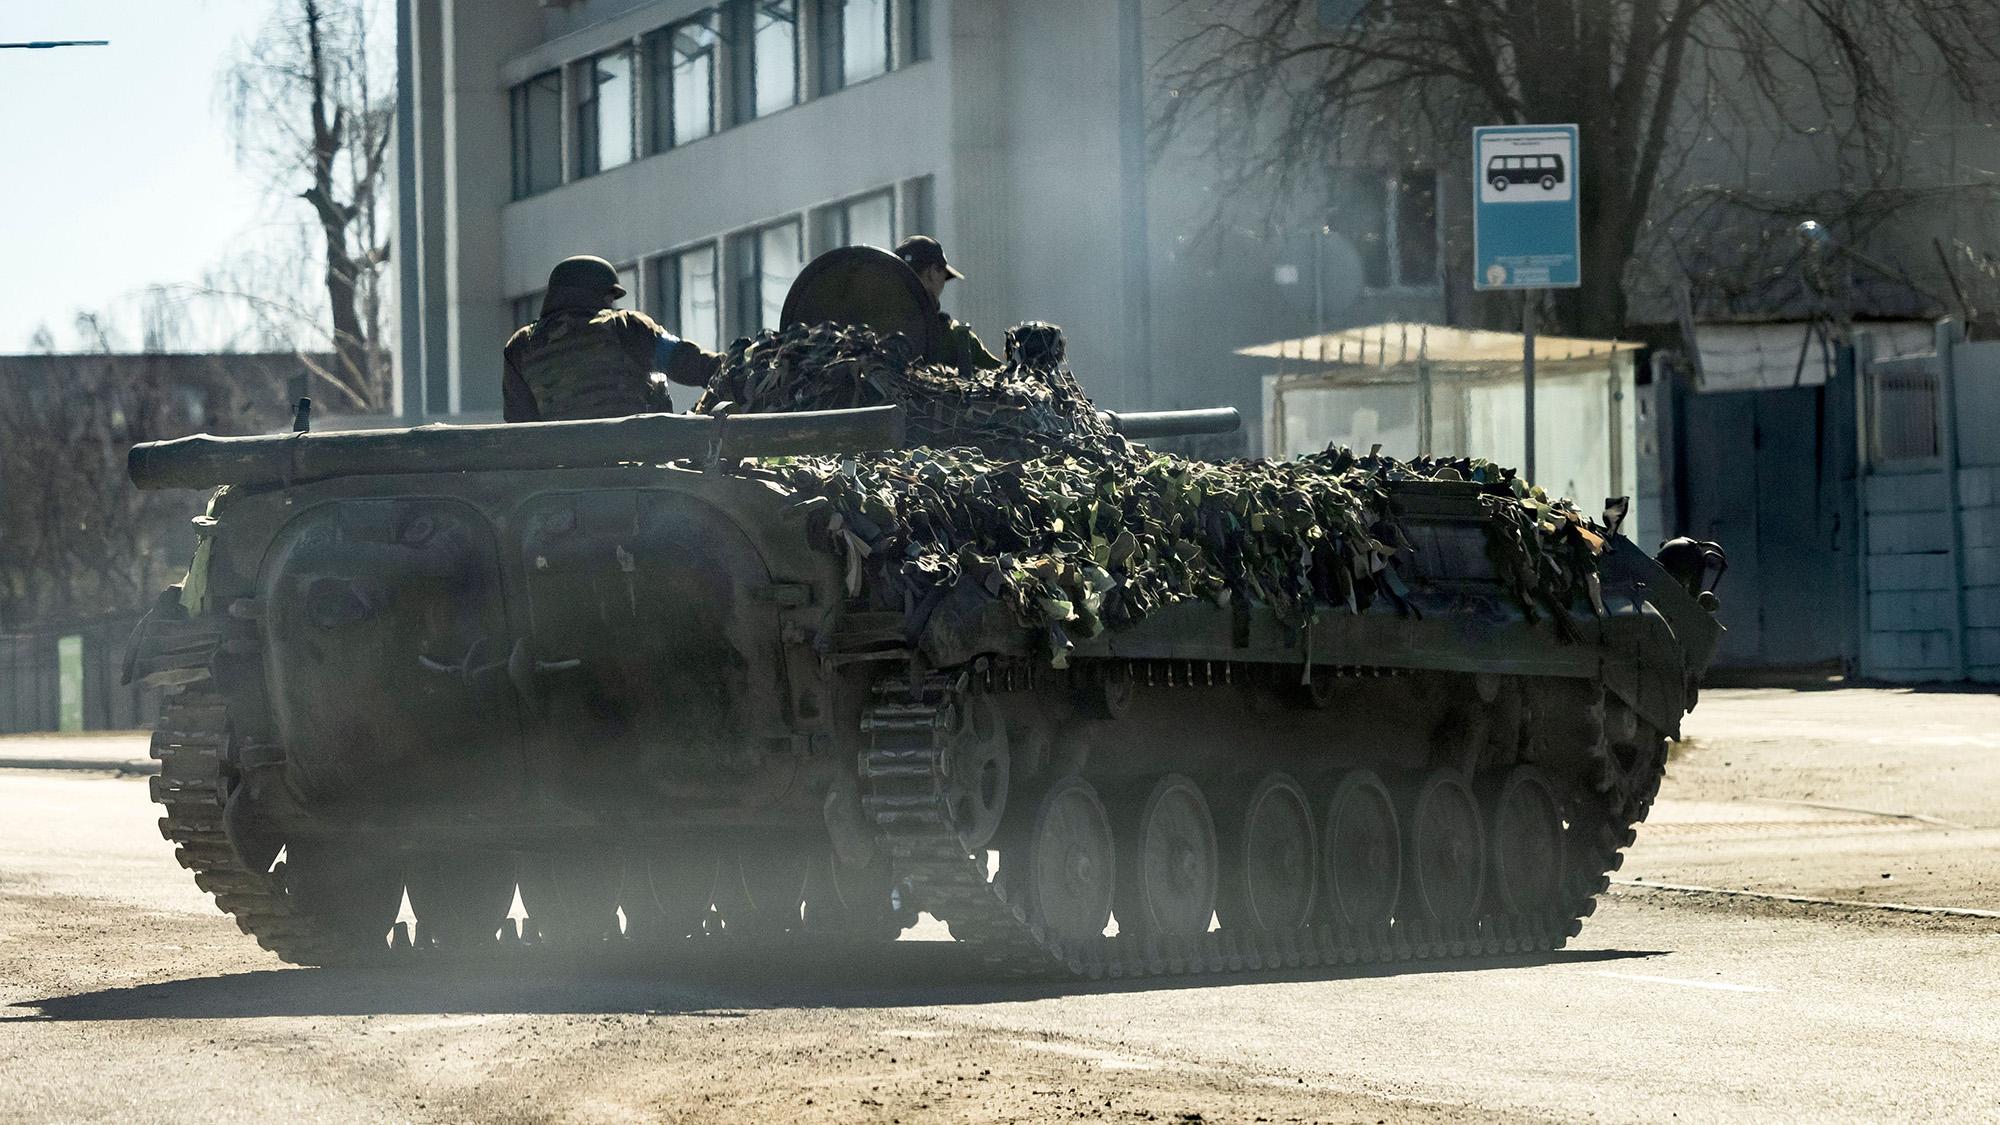 A Ukrainian armored military vehicle is seen on a road in Kiev on March 22.